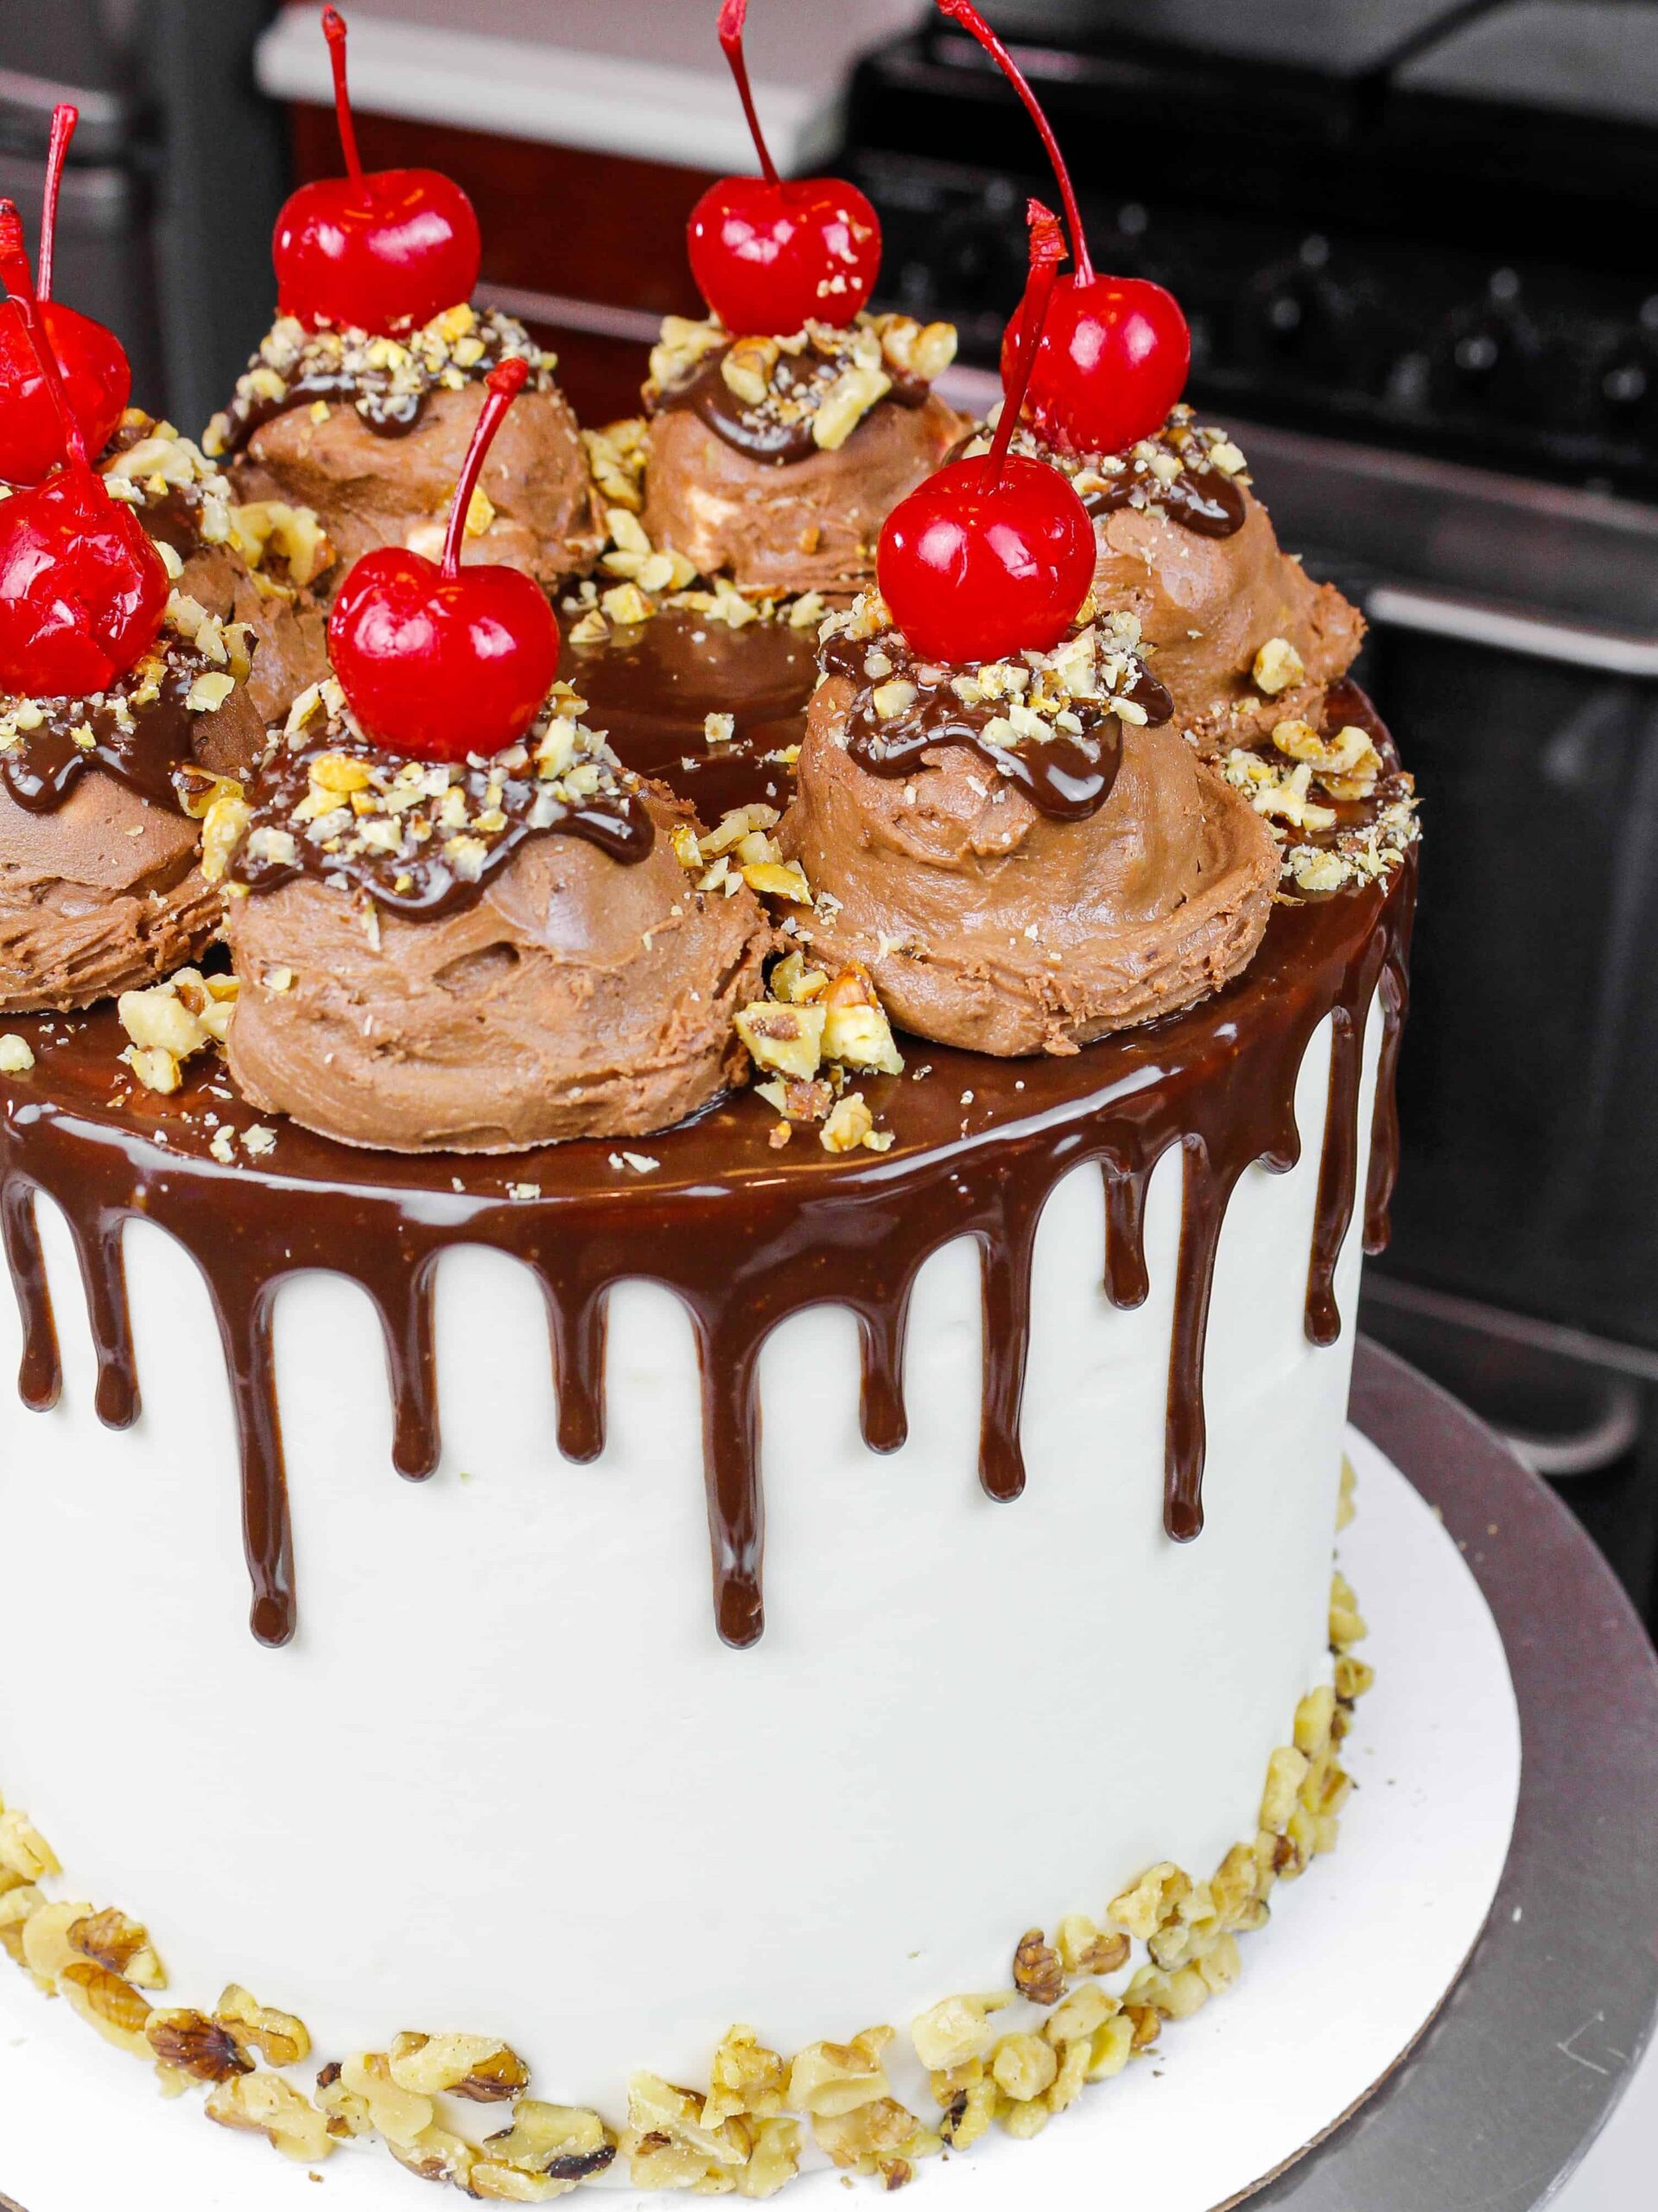 image of a rocky road cake made with fluffy chocolate cake layers, marshmallow frosting, and decorate with ice cream scoops and a chocolate drip